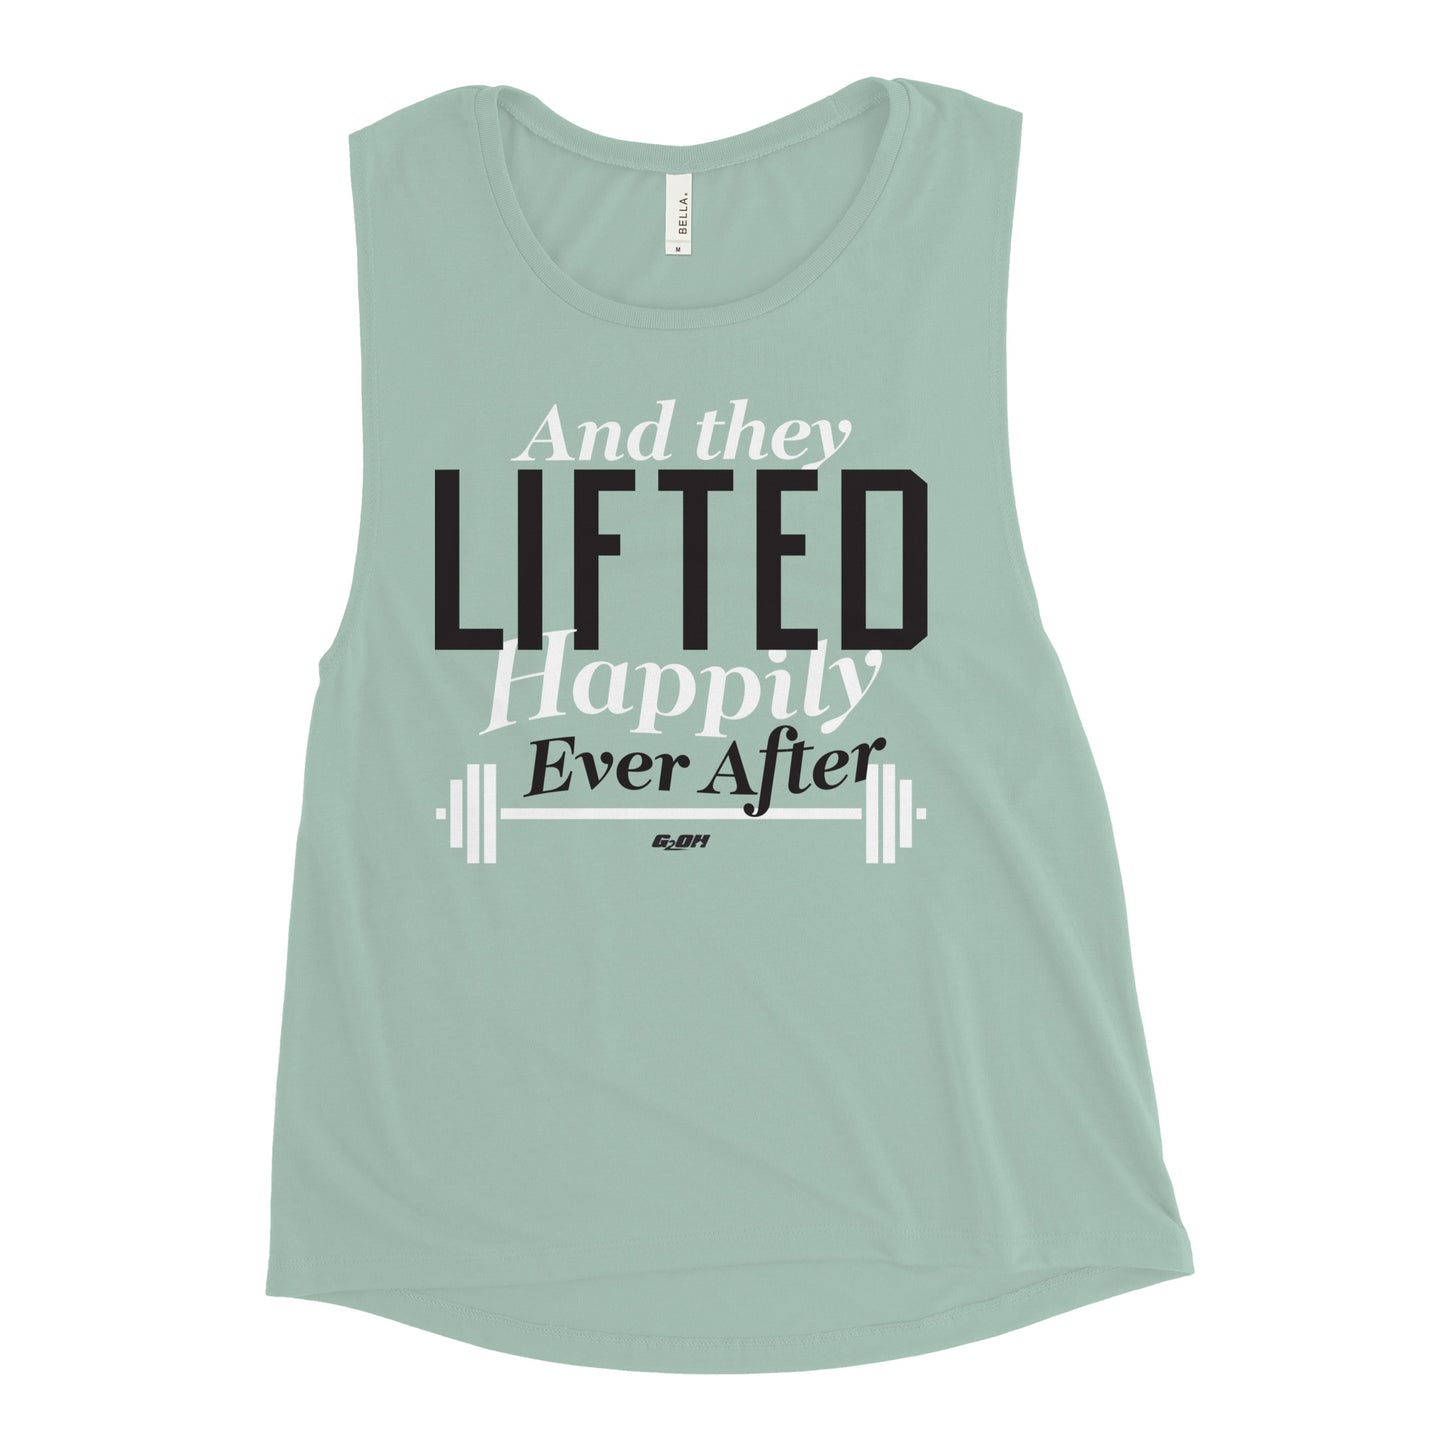 And They Lifted Happily Ever After Women's Muscle Tank